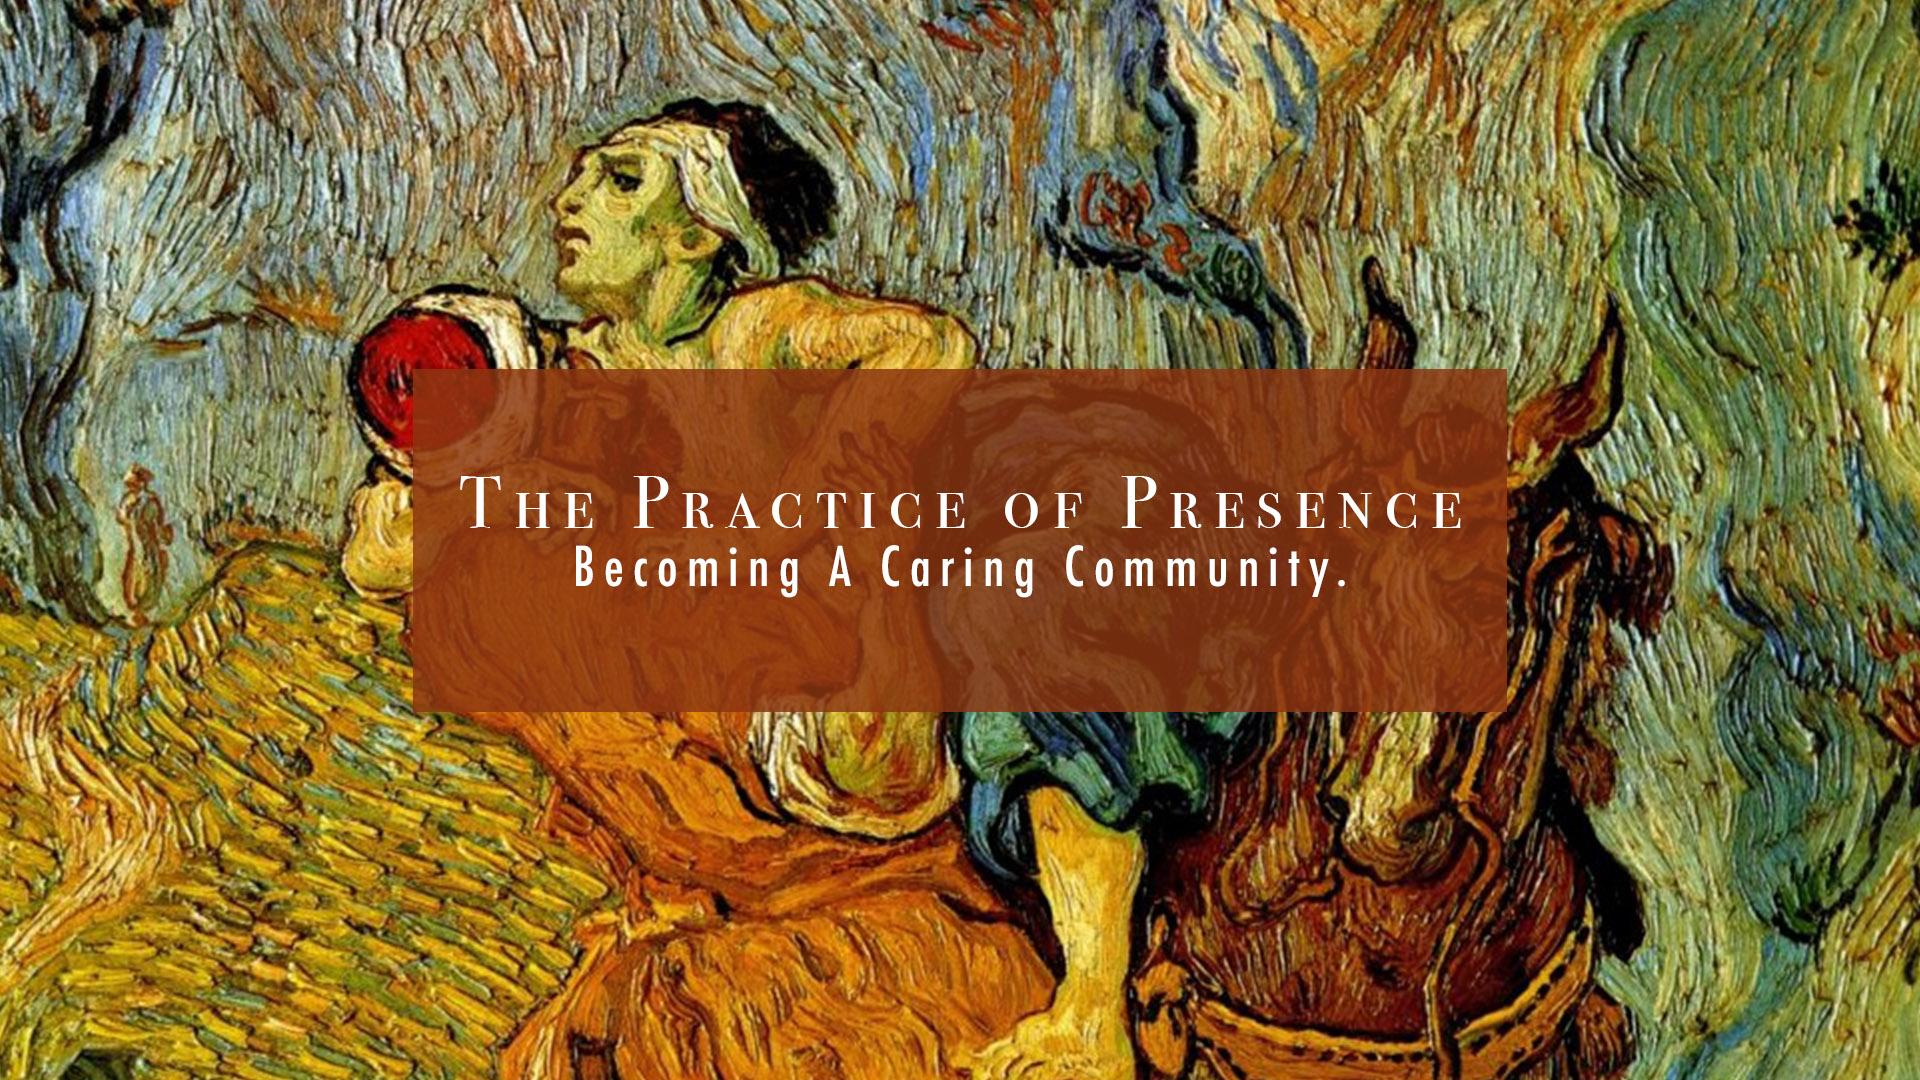 The Practice of Presence: Becoming A Caring Community